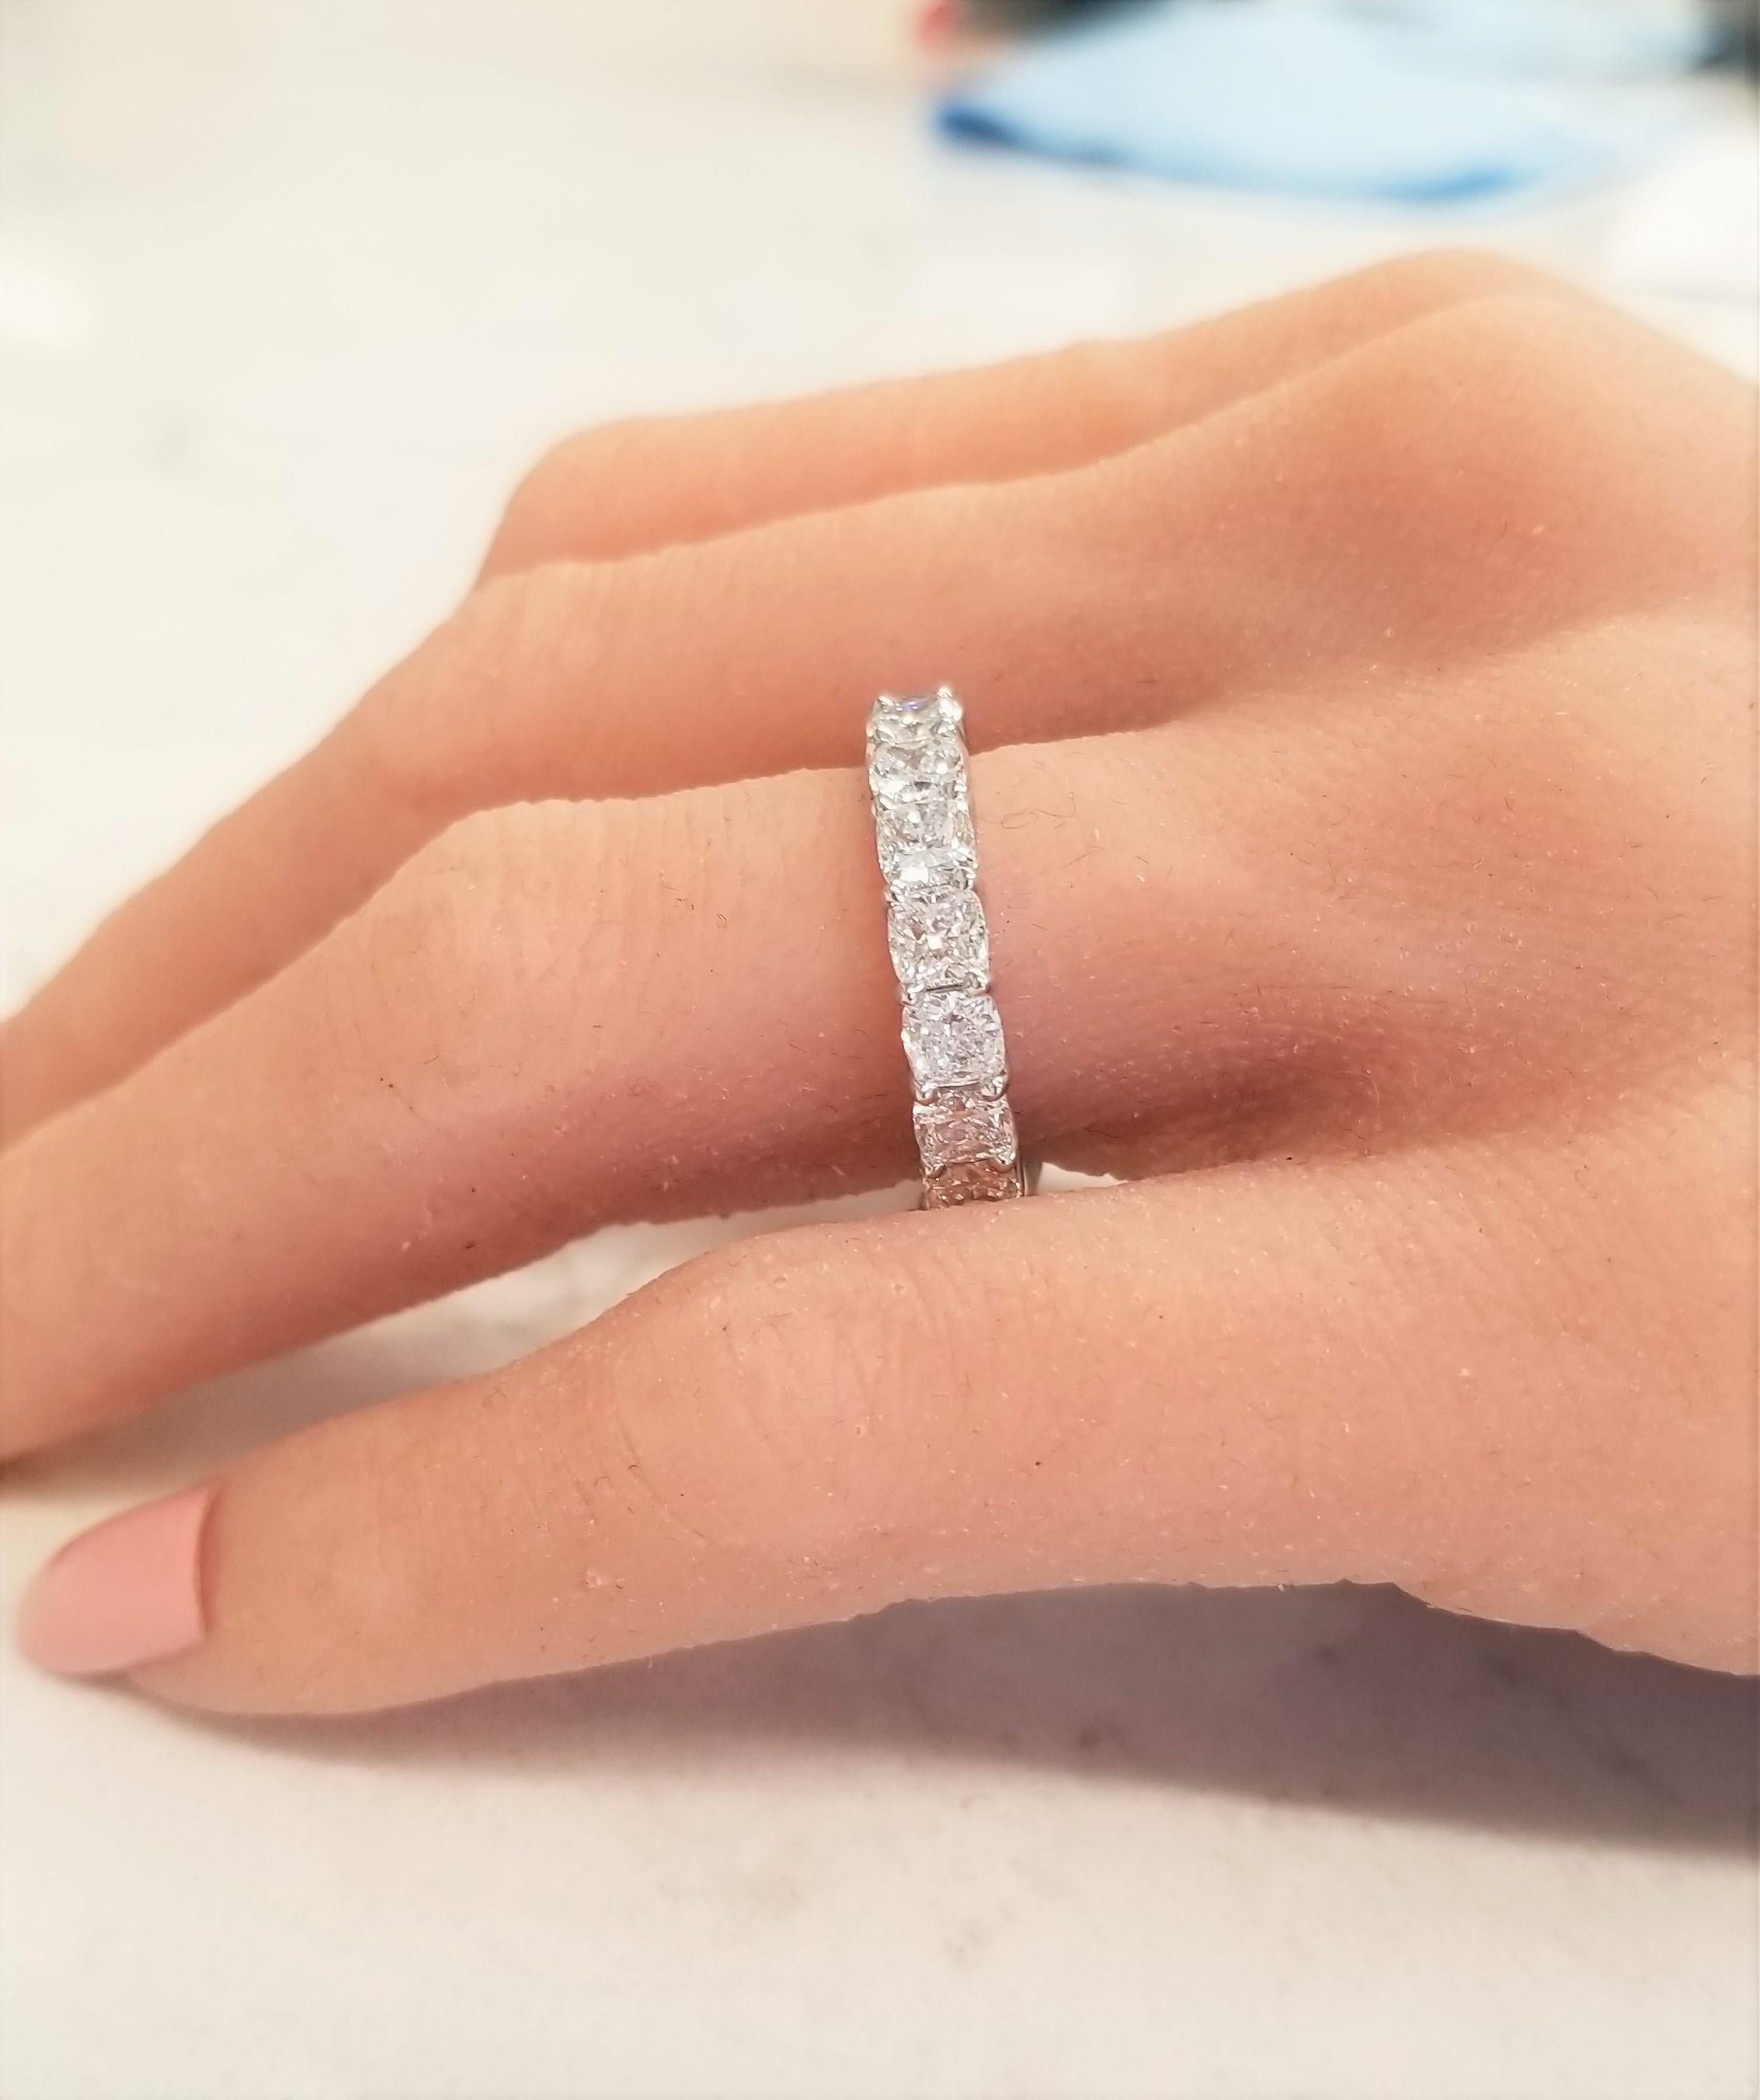 This is an impressive eternity wedding band that boasts 18 square cushion cut diamonds that have been expertly prong set all the way around totaling 5.55 carats. The diamonds are F in color and VS in clarity. They are perfectly matched, measuring